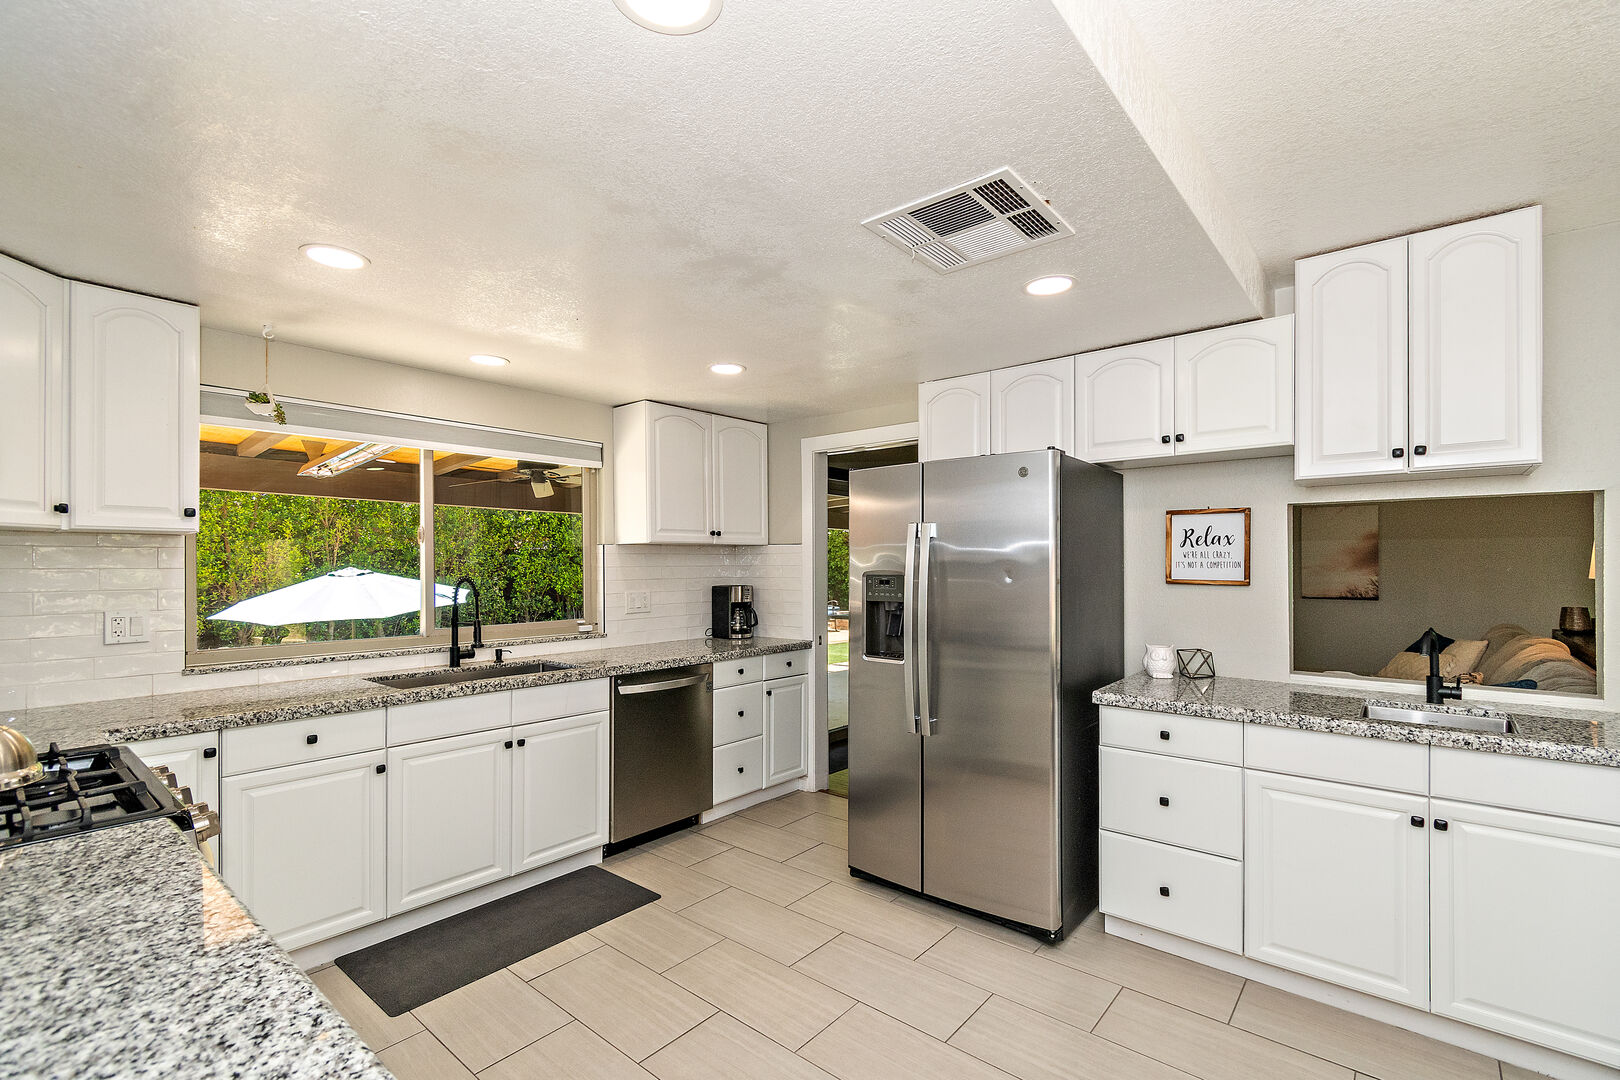 The fully-equipped kitchen features stunning stainless steel appliances such as a GE side-by-side refrigerator with a water and ice dispenser.